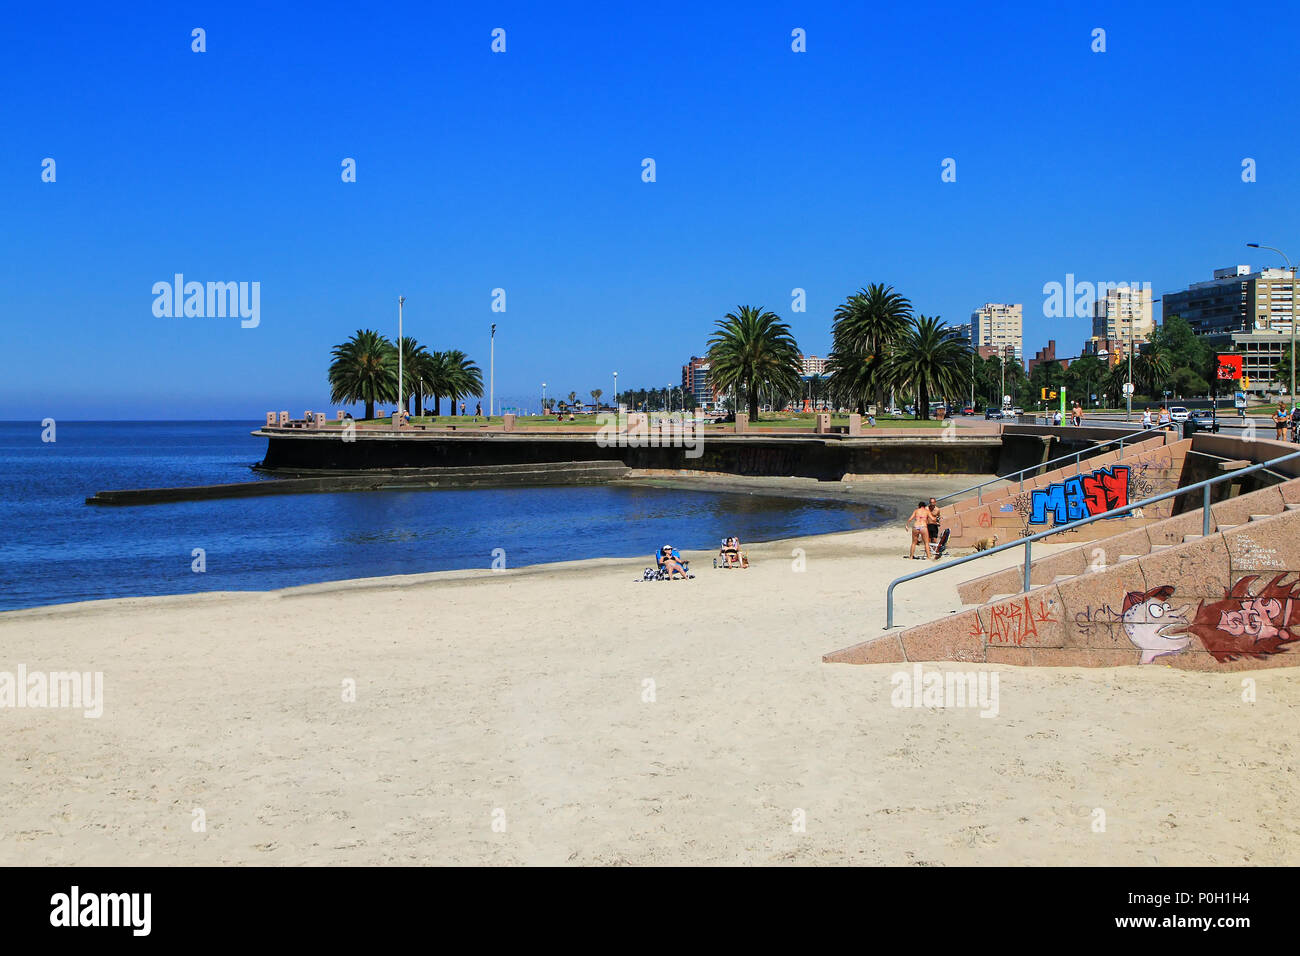 Sandy beach along the bank of the Rio de la Plata in Montevideo, Uruguay. Montevideo is the capital and the largest city of Uruguay Stock Photo